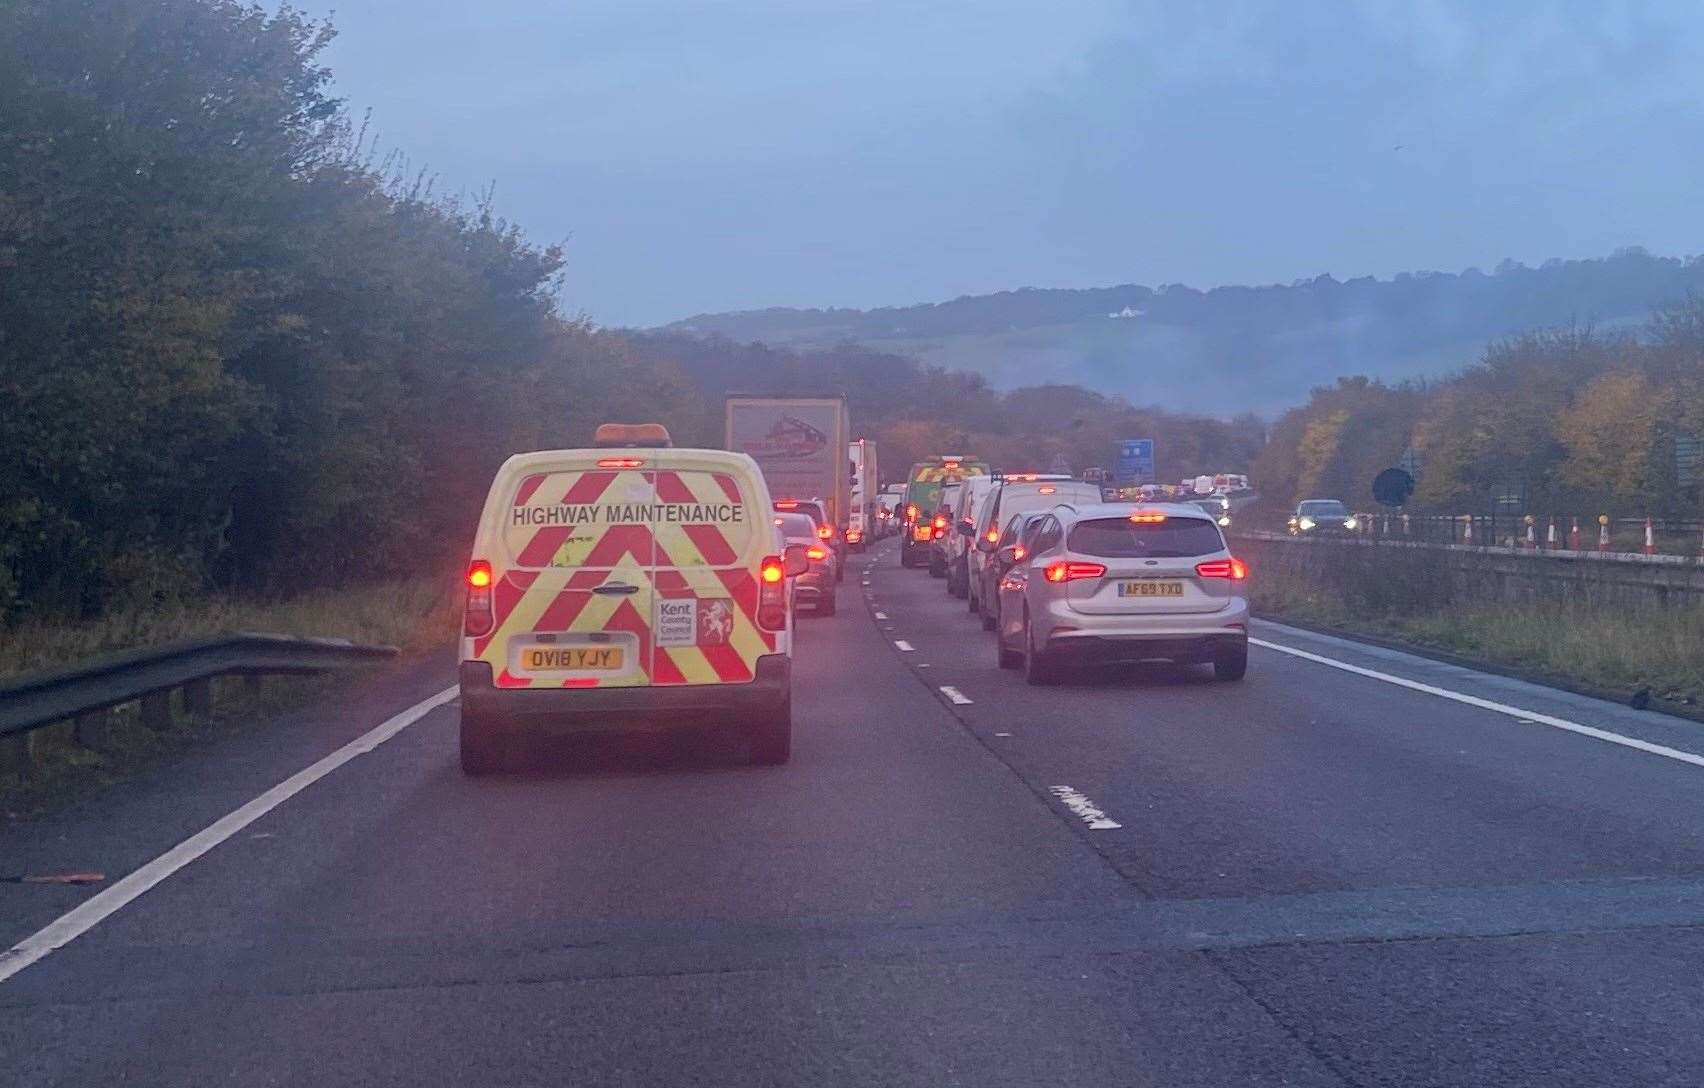 There are long delays on the London-bound stretch of the A20 near Folkestone following a vehicle fire